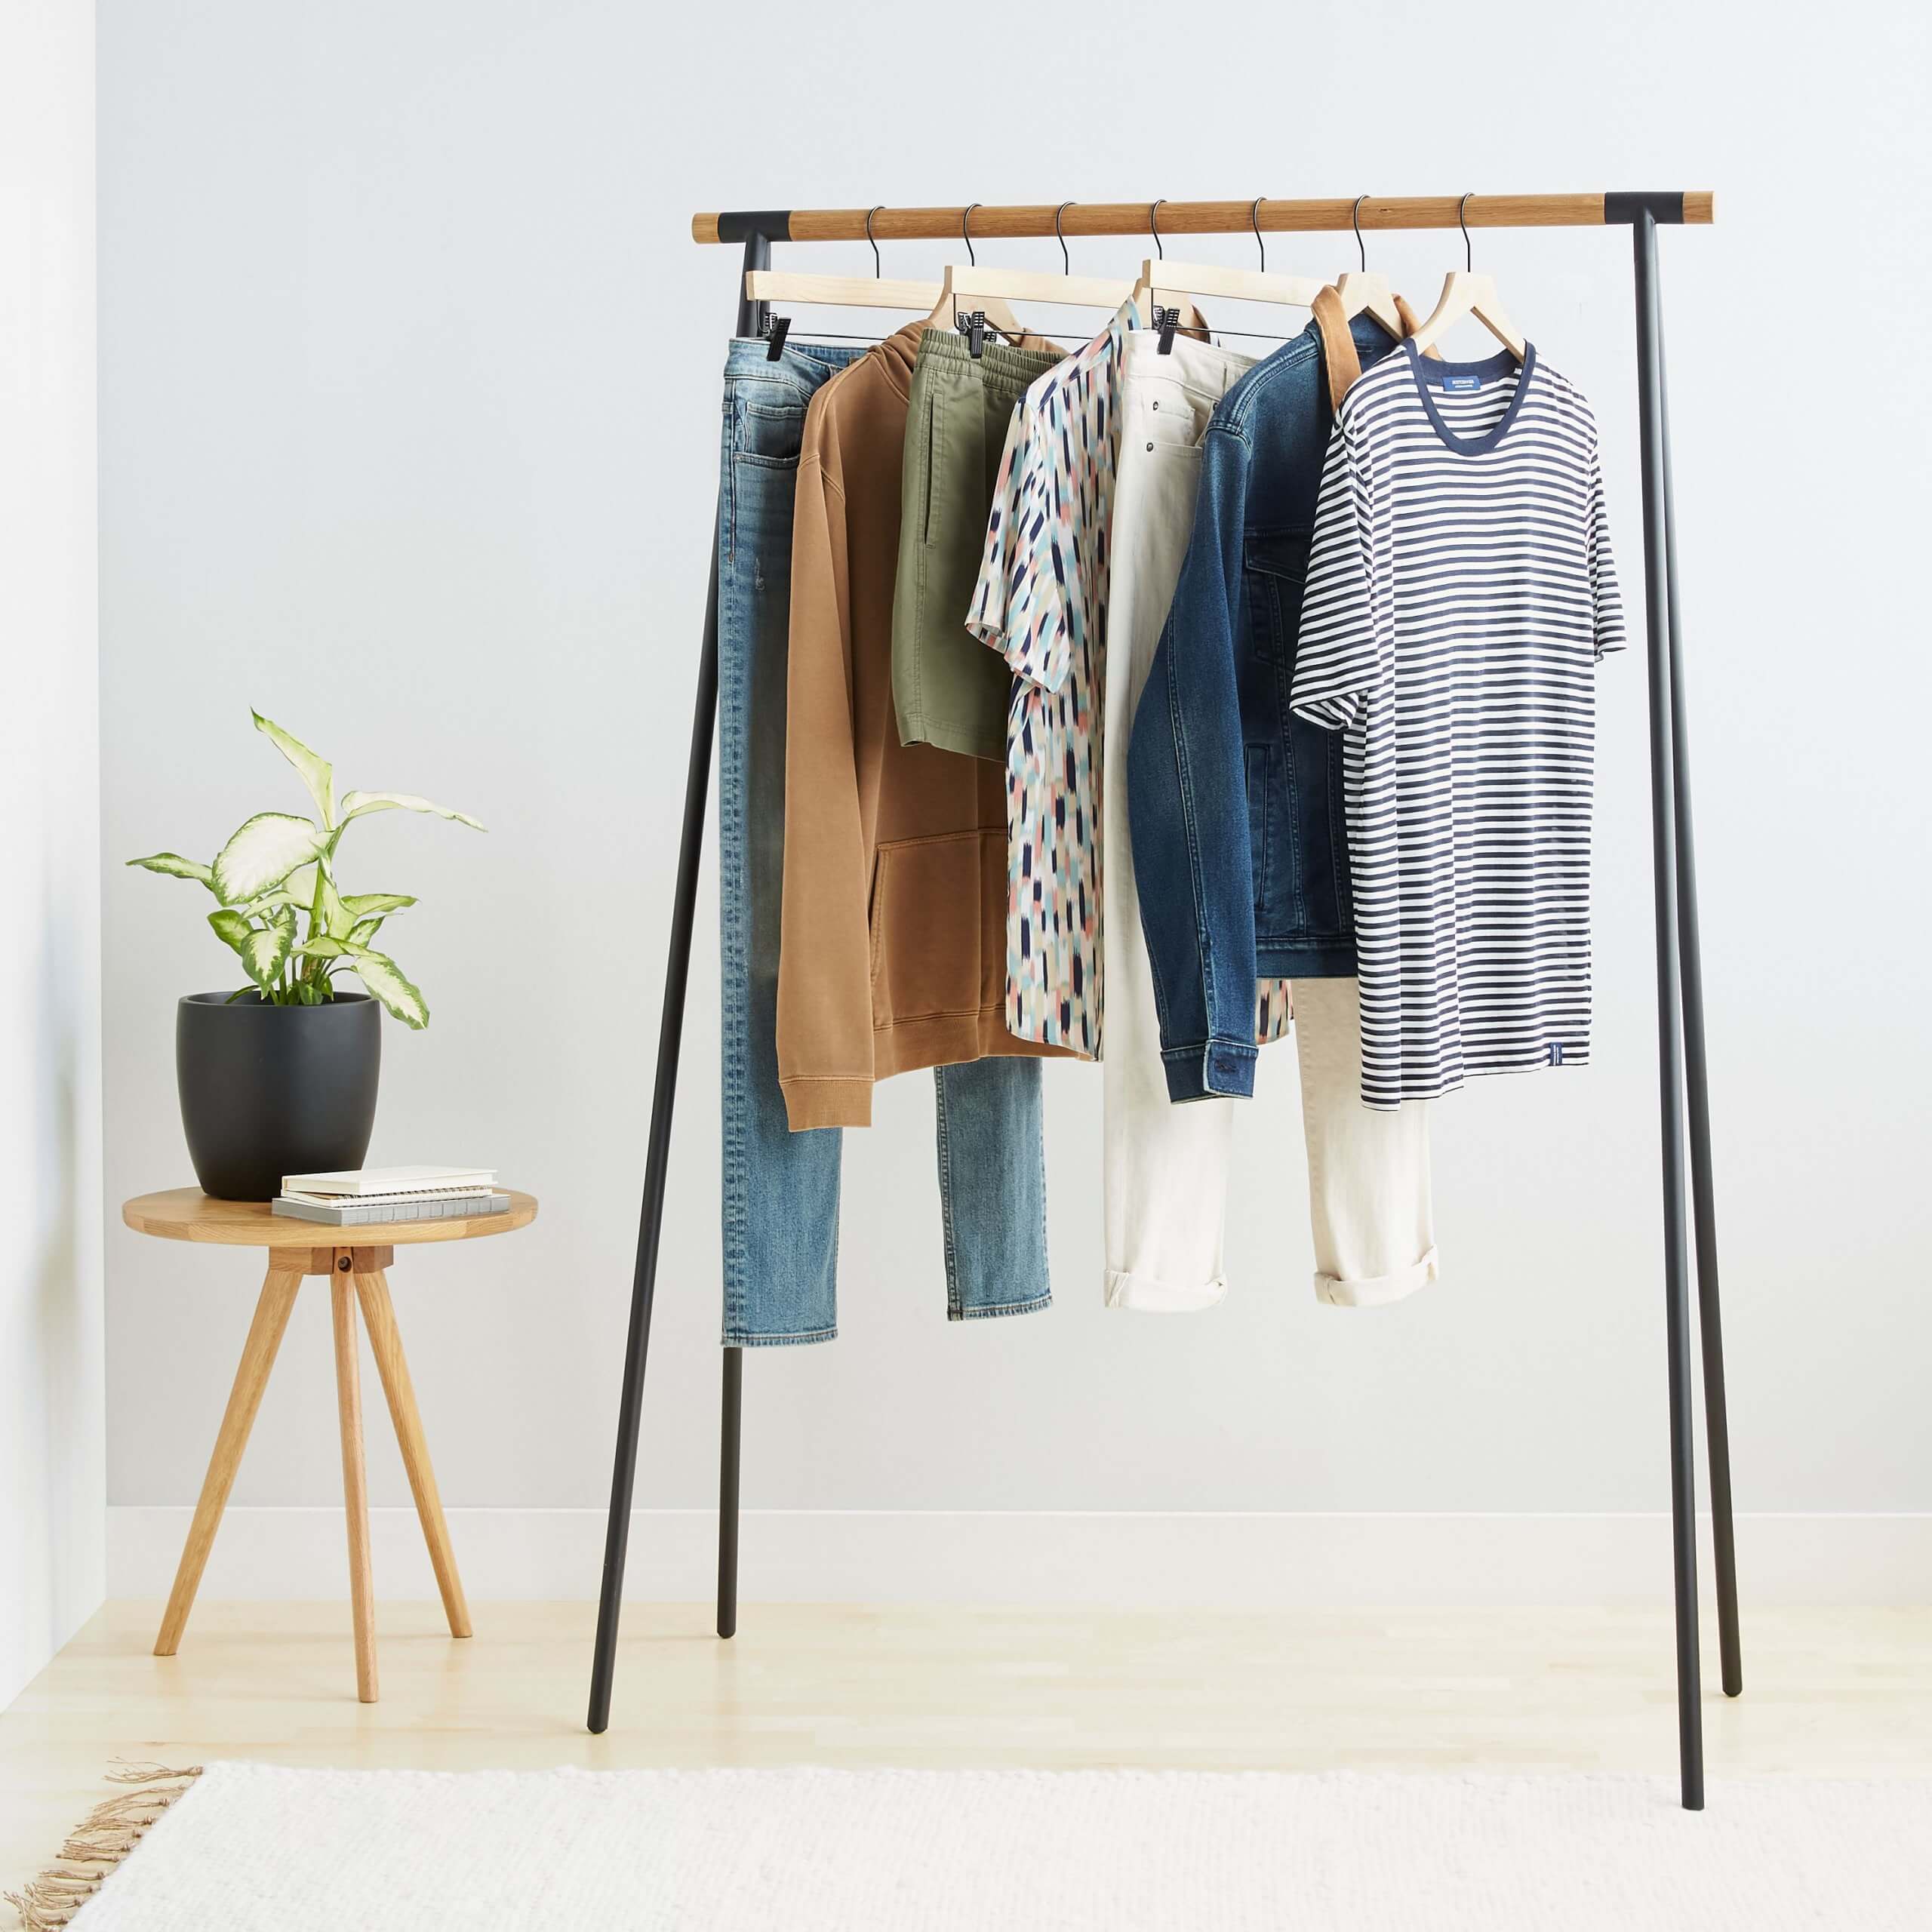 From Playlists to Outfits: Stitch Fix and Spotify Team Up to Offer  Personalized Virtual Styling and Experiences